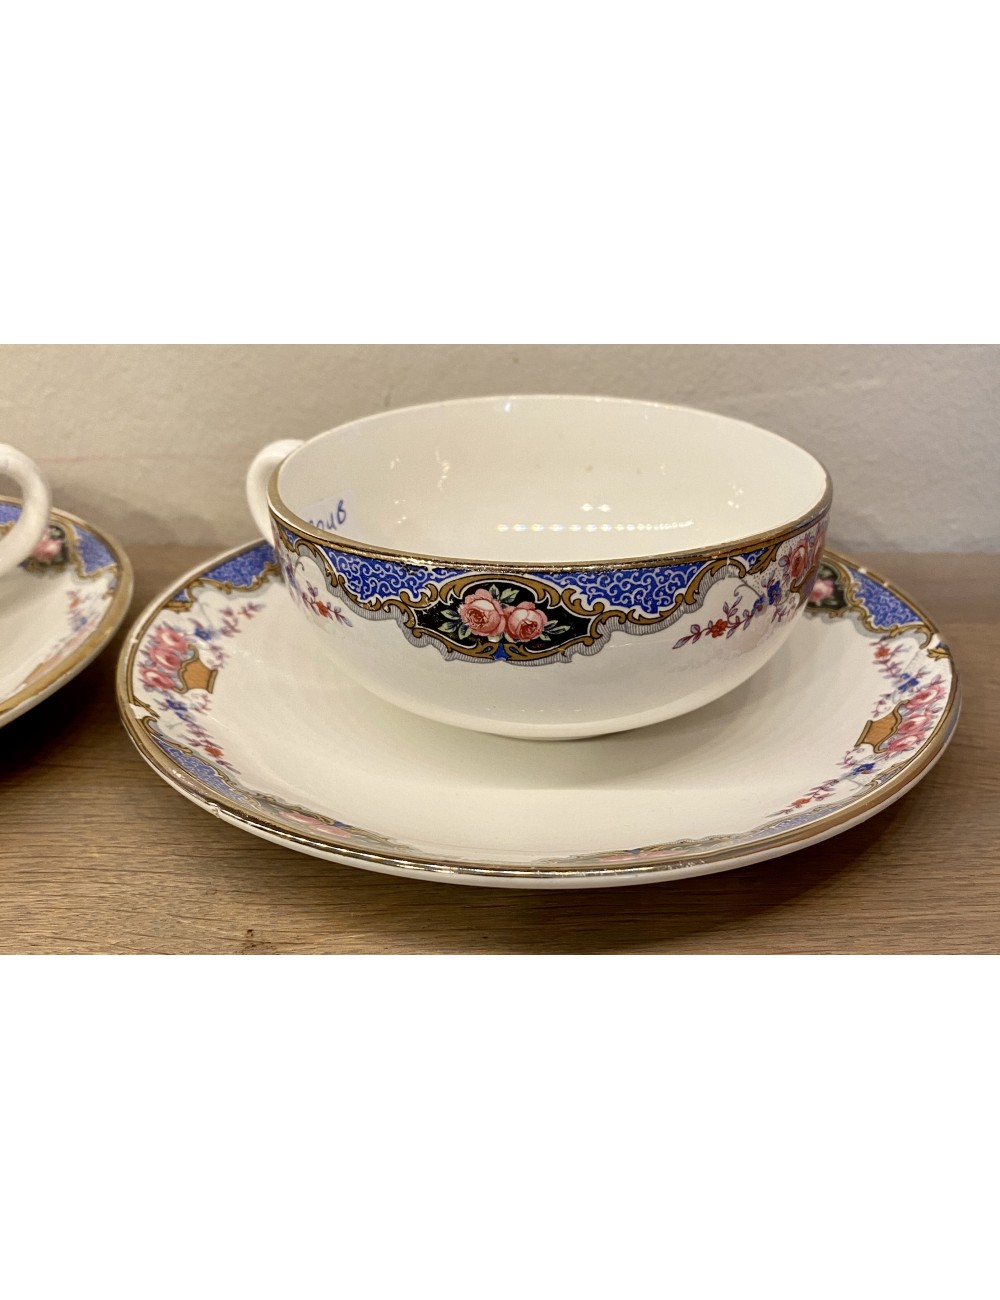 Cup and saucer - Sarreguemines - Digoin - décor 427(?) with floral border